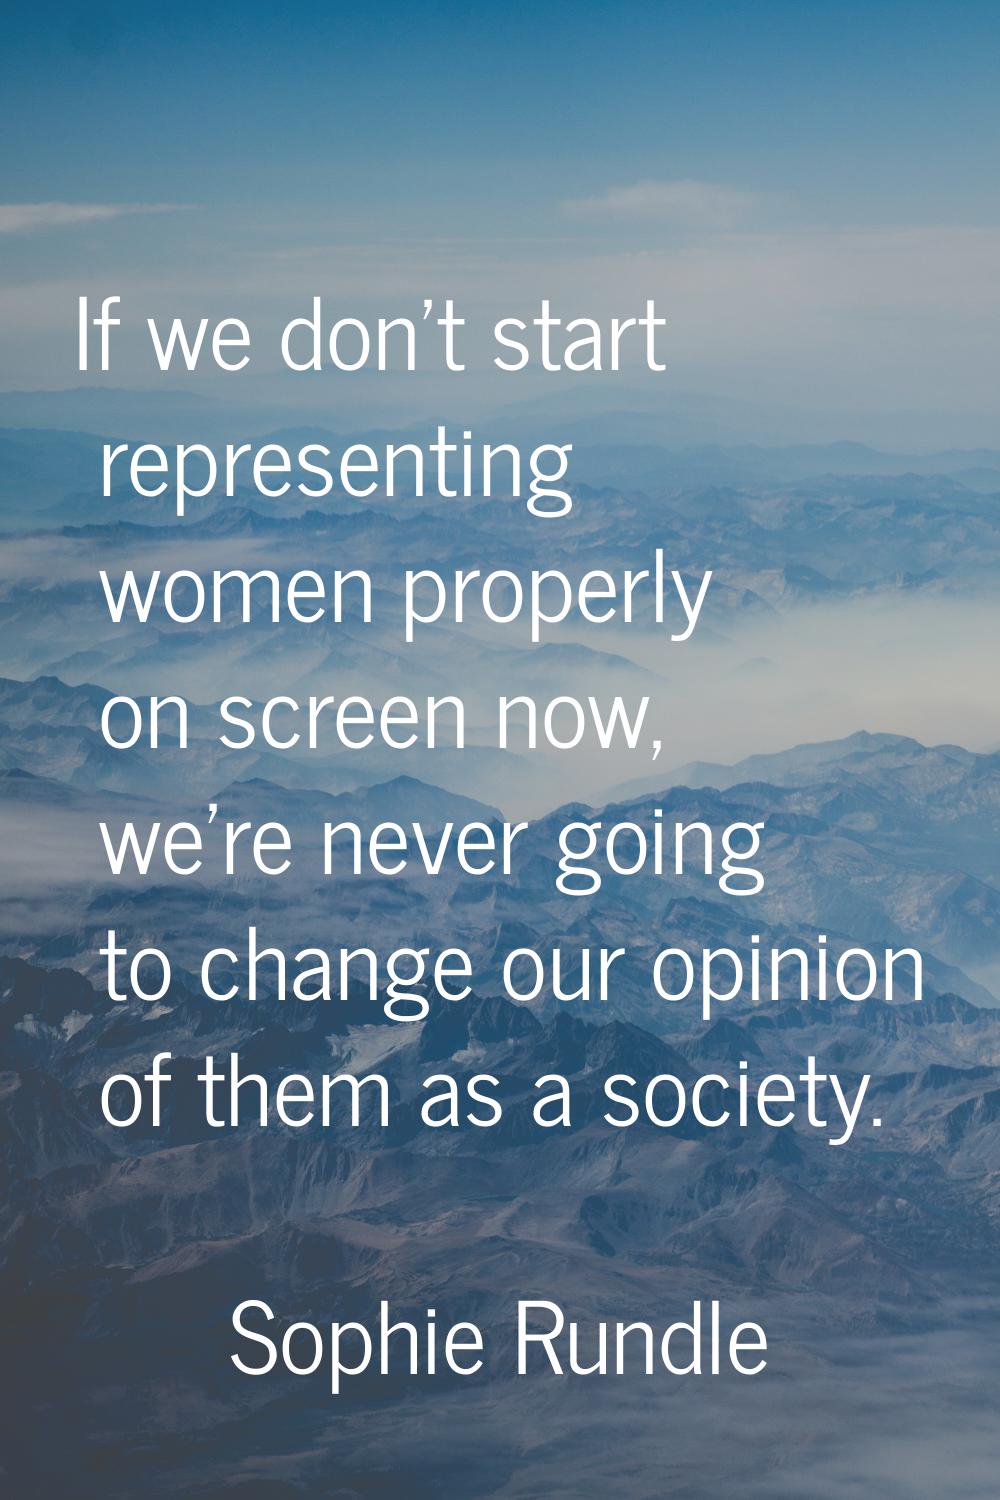 If we don't start representing women properly on screen now, we're never going to change our opinio